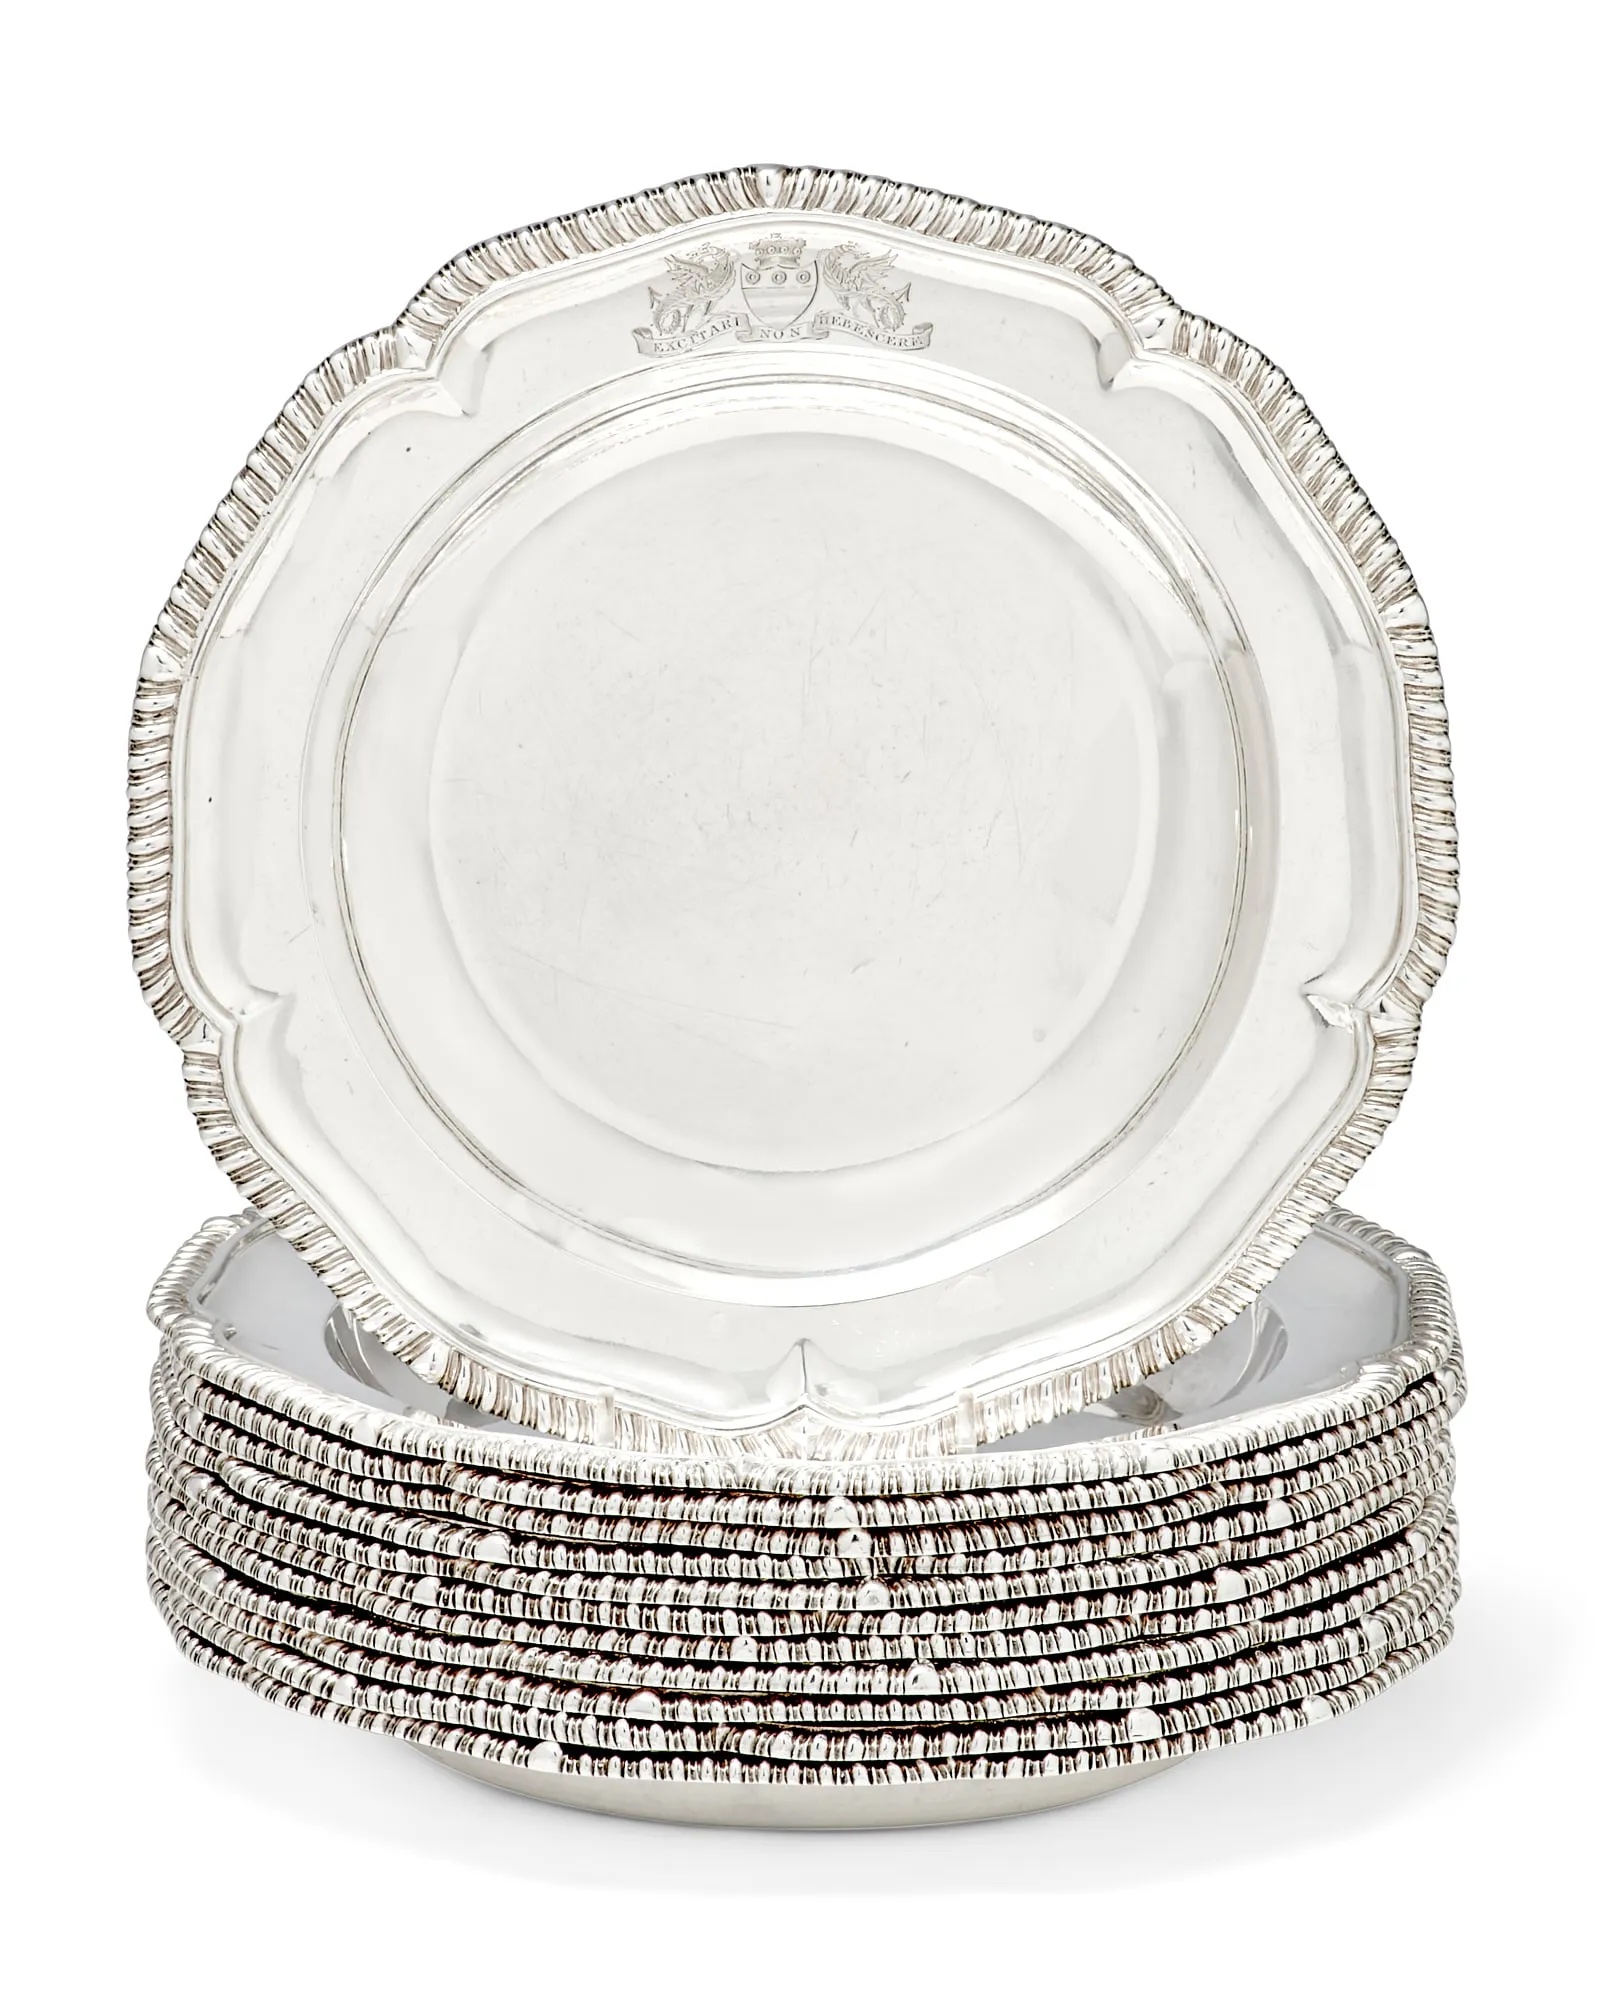 Set of 12 George IV sterling silver soup plates, estimated at $4,000-$6,000 at Andrew Jones.